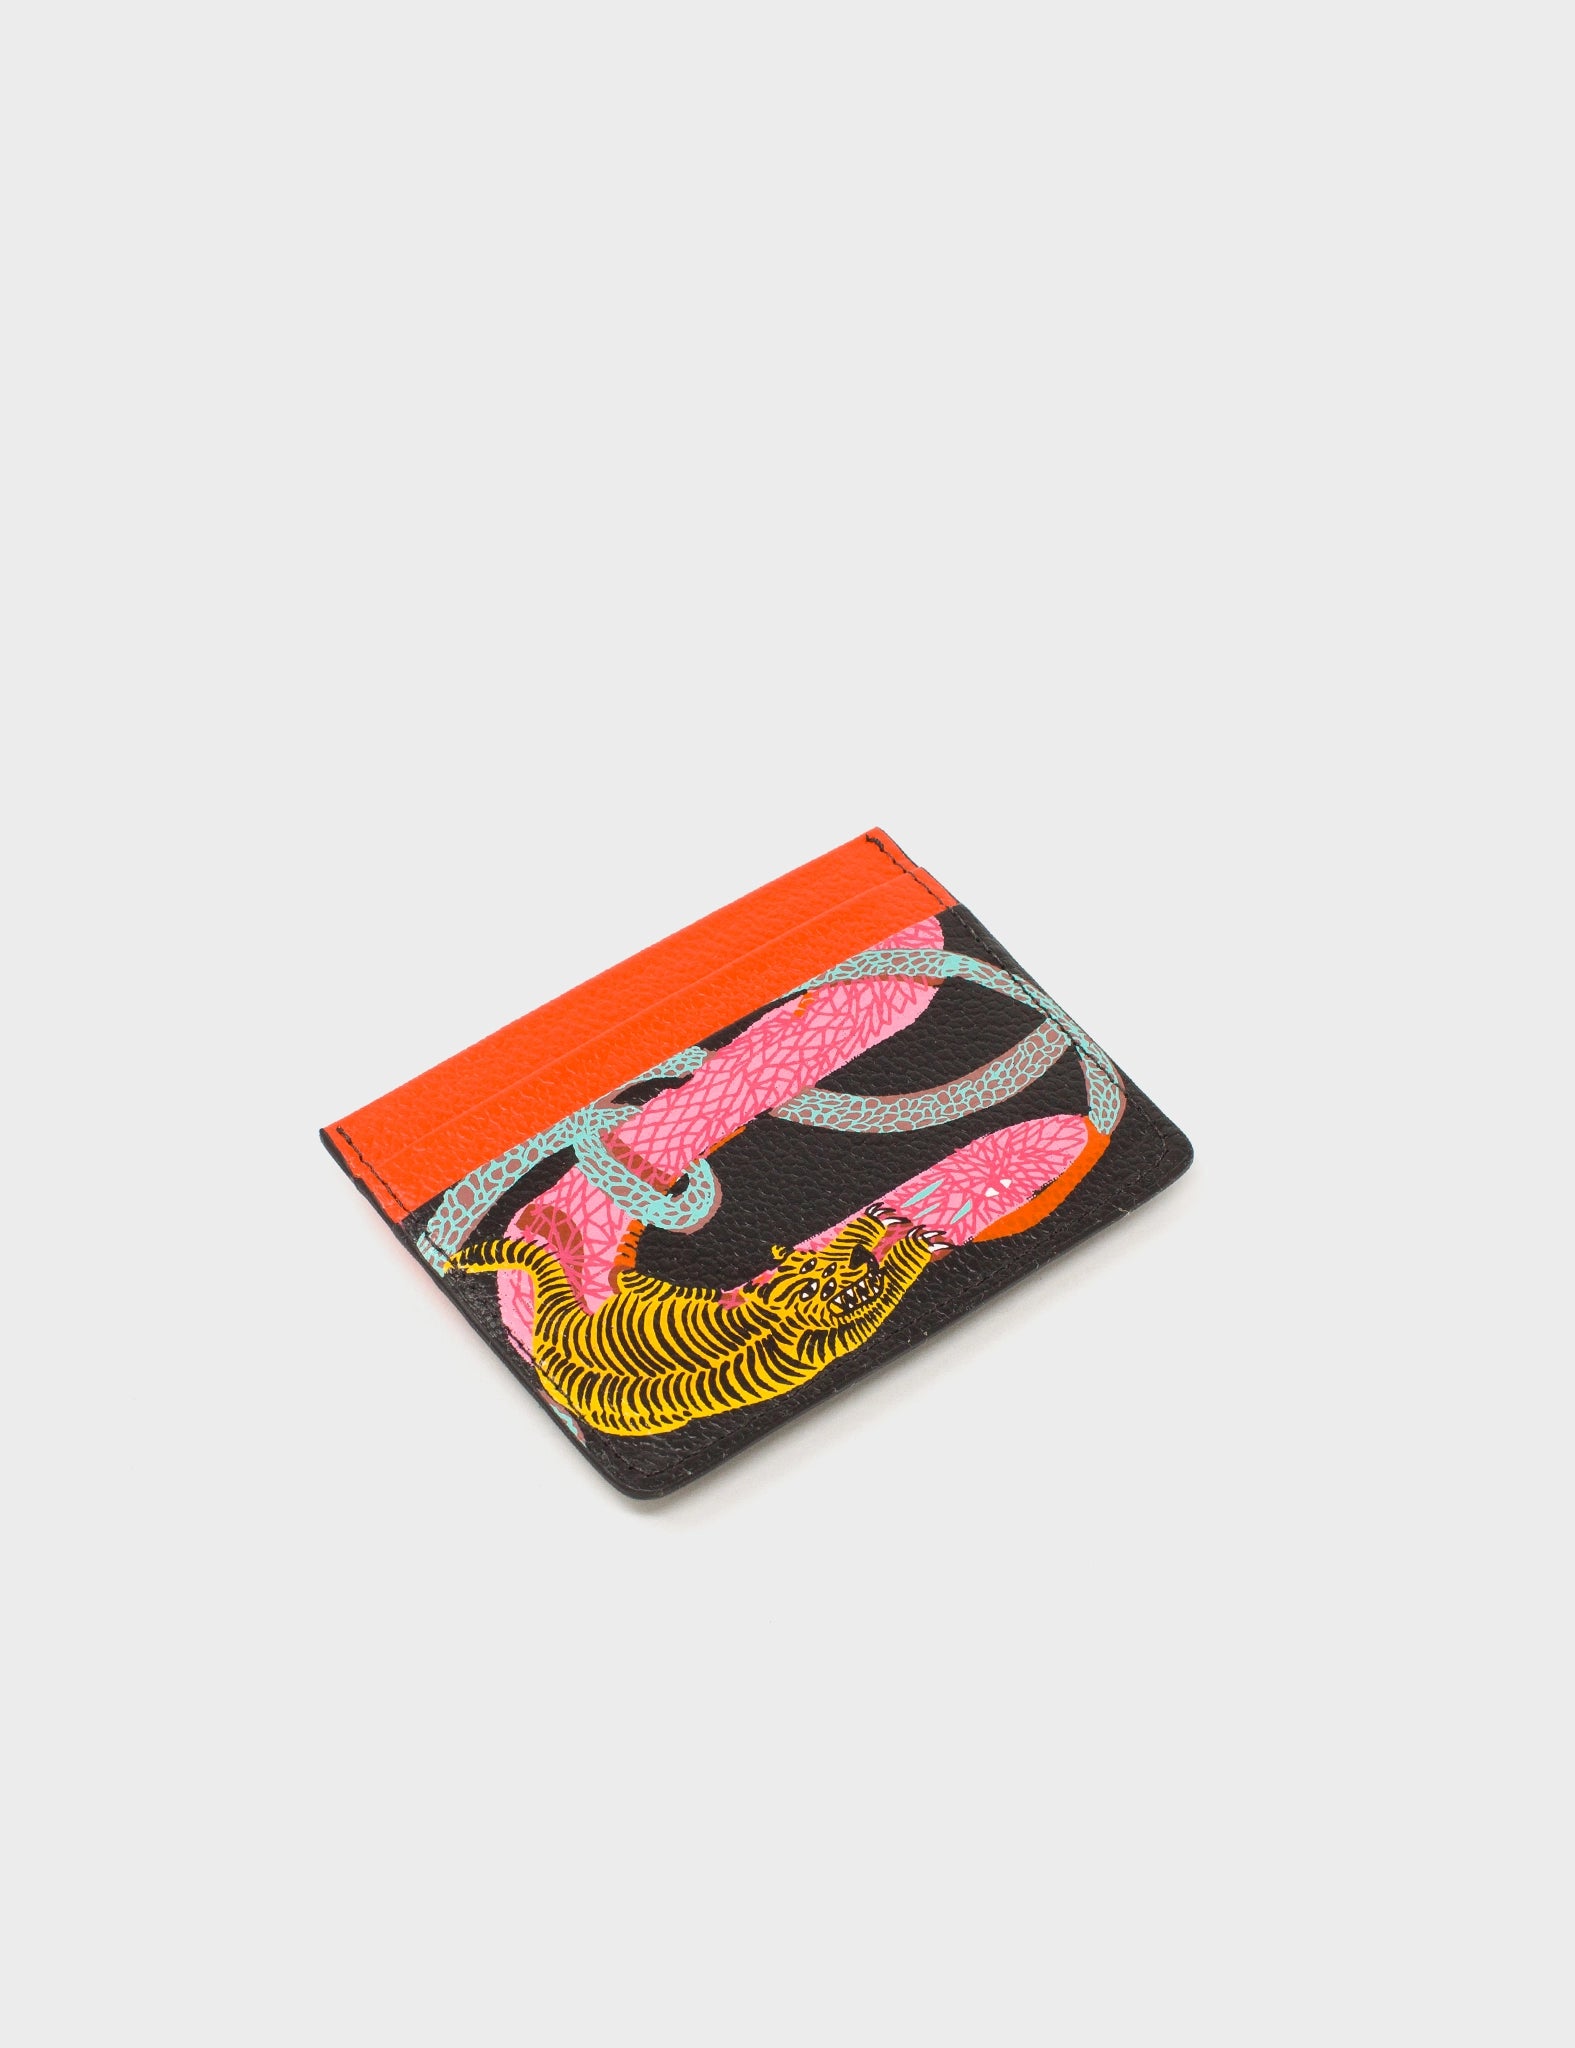 Black And Fiesta Red Leather Cardholder - Tiger and Snake Print - Side